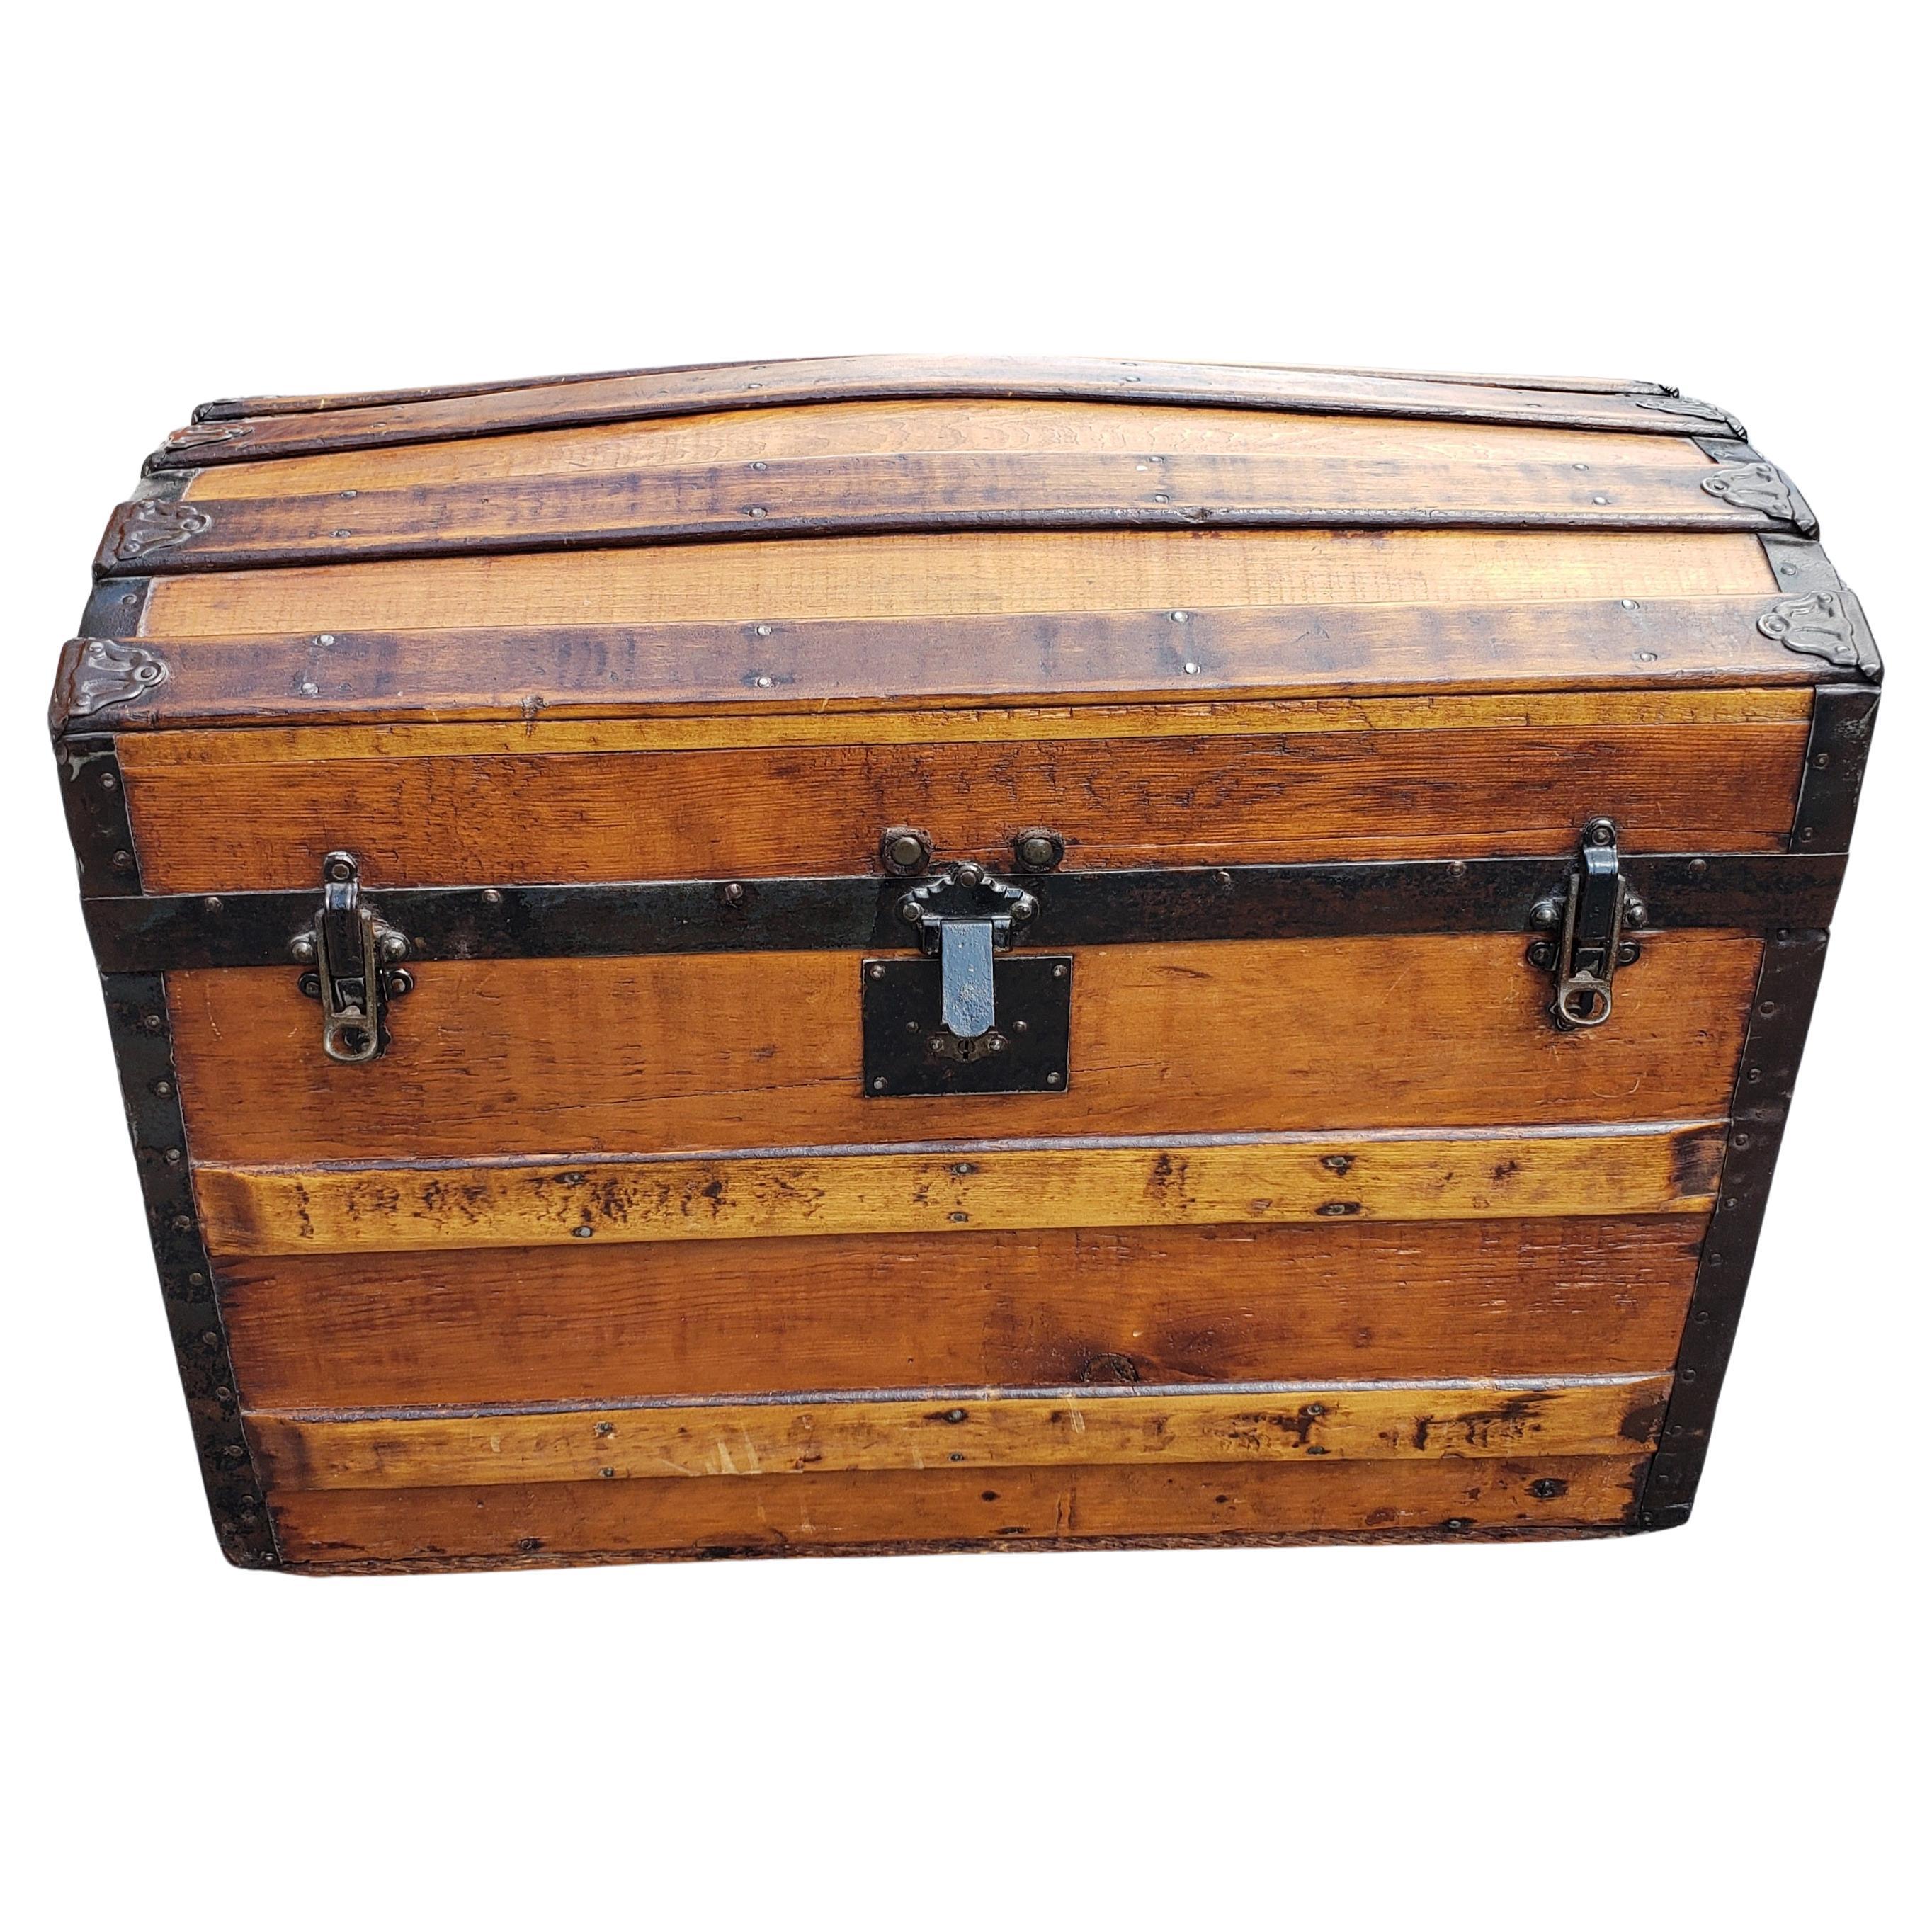 Early 20th Century Refinished American Rolling Pine Blanket Chest Storage Trunk For Sale